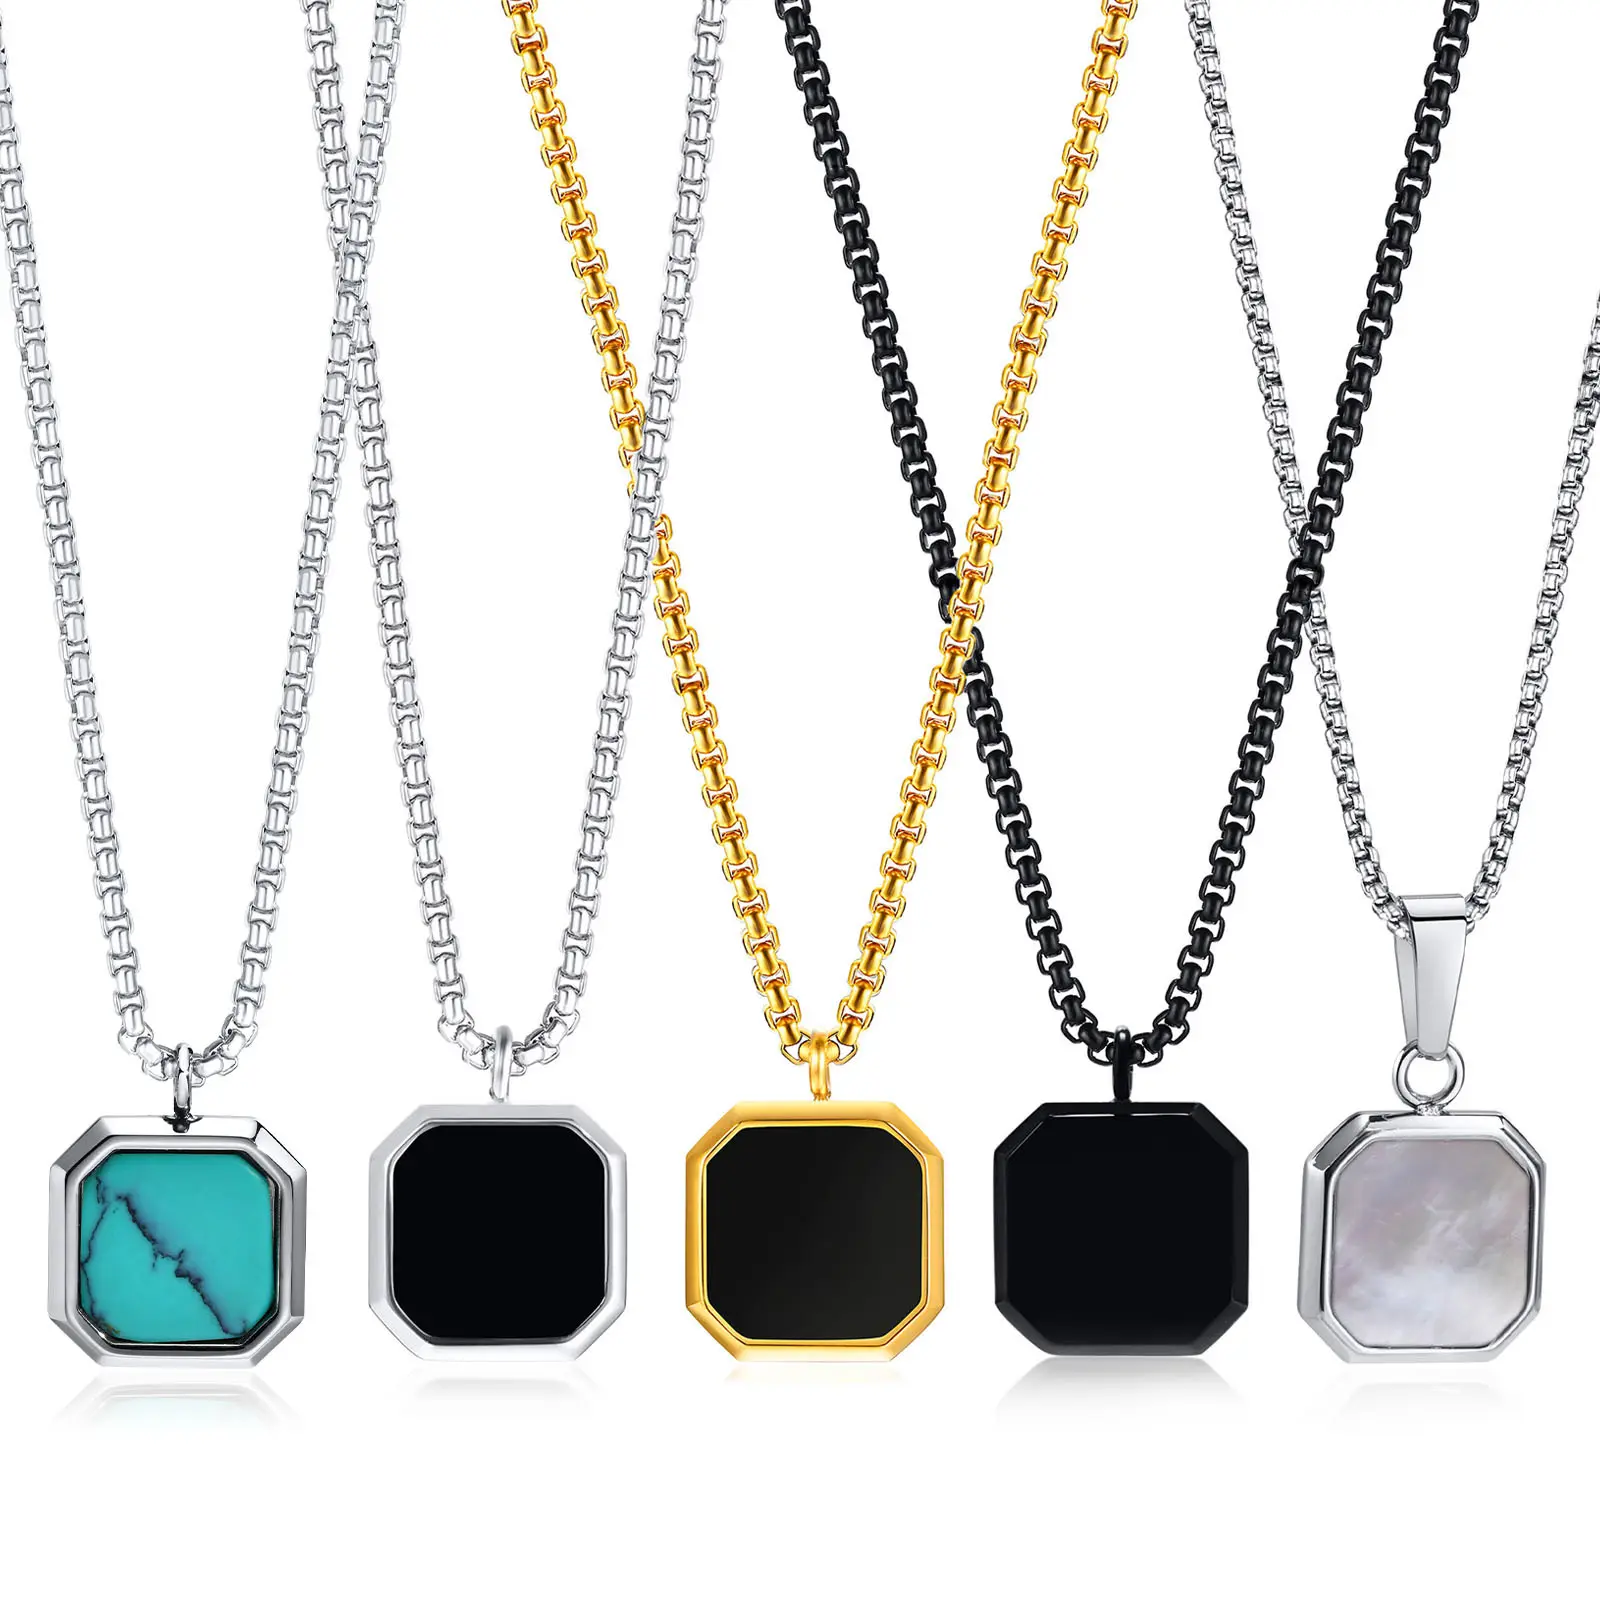 Latest Fine Jewelry Necklace 18K Gold Square Turquoise White Shell Black Oil Pendant Stainless Steel Necklace Men